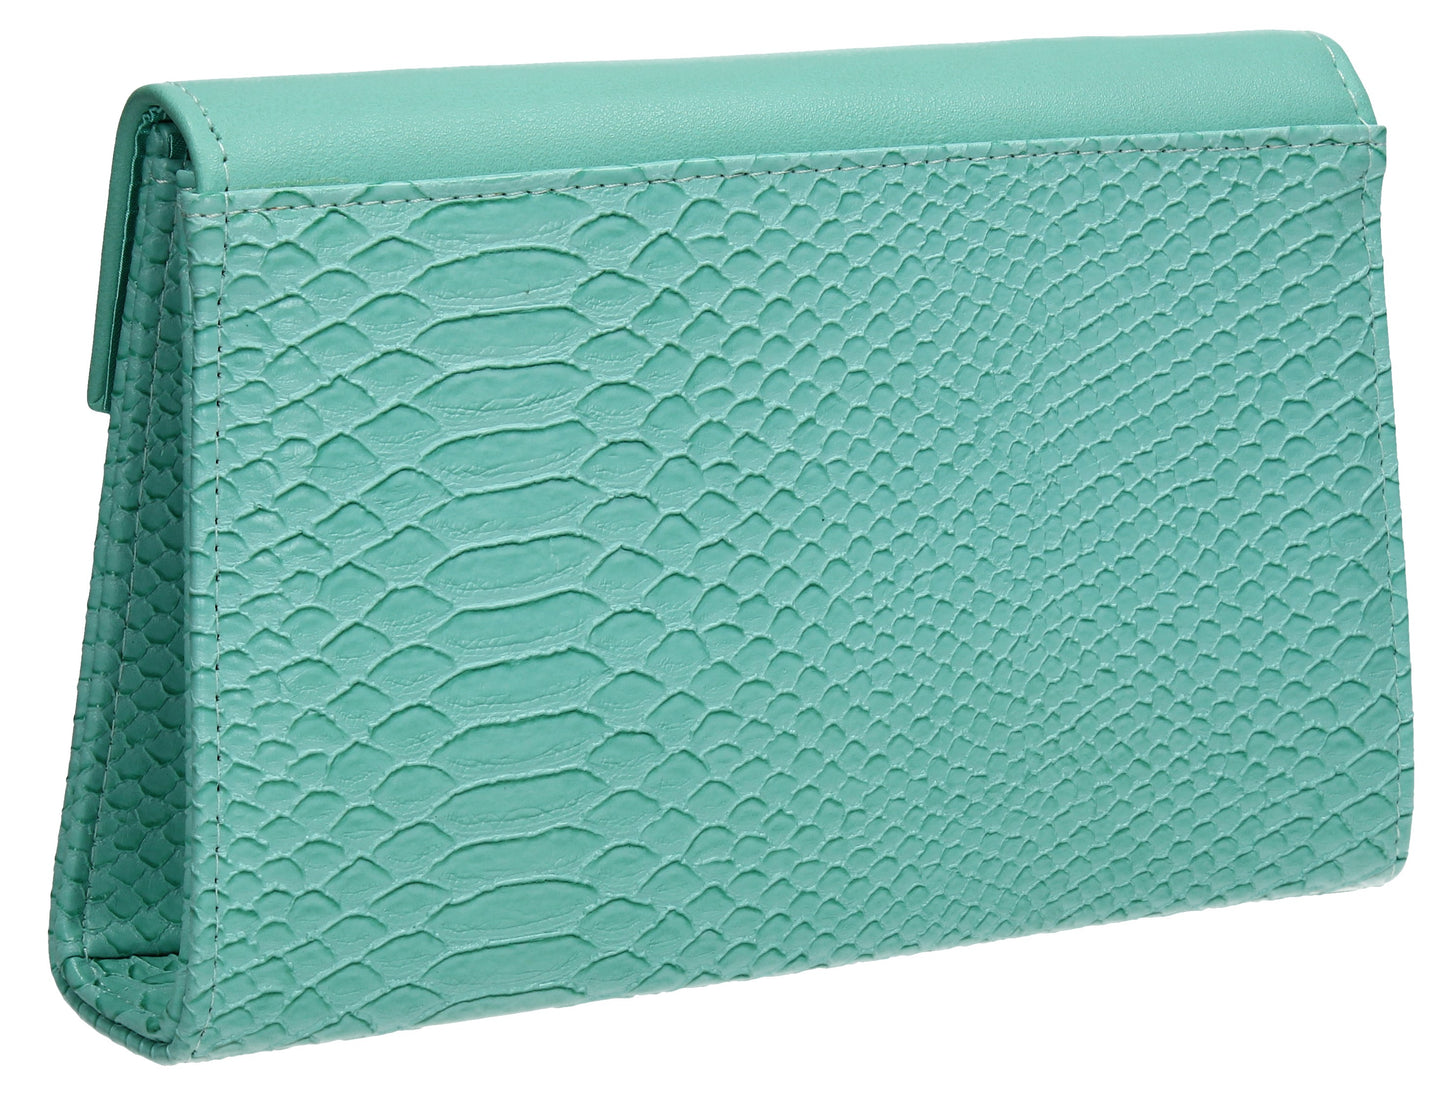 SWANKYSWANS Vanessa Clutch Bag Turquoise Cute Cheap Clutch Bag For Weddings School and Work